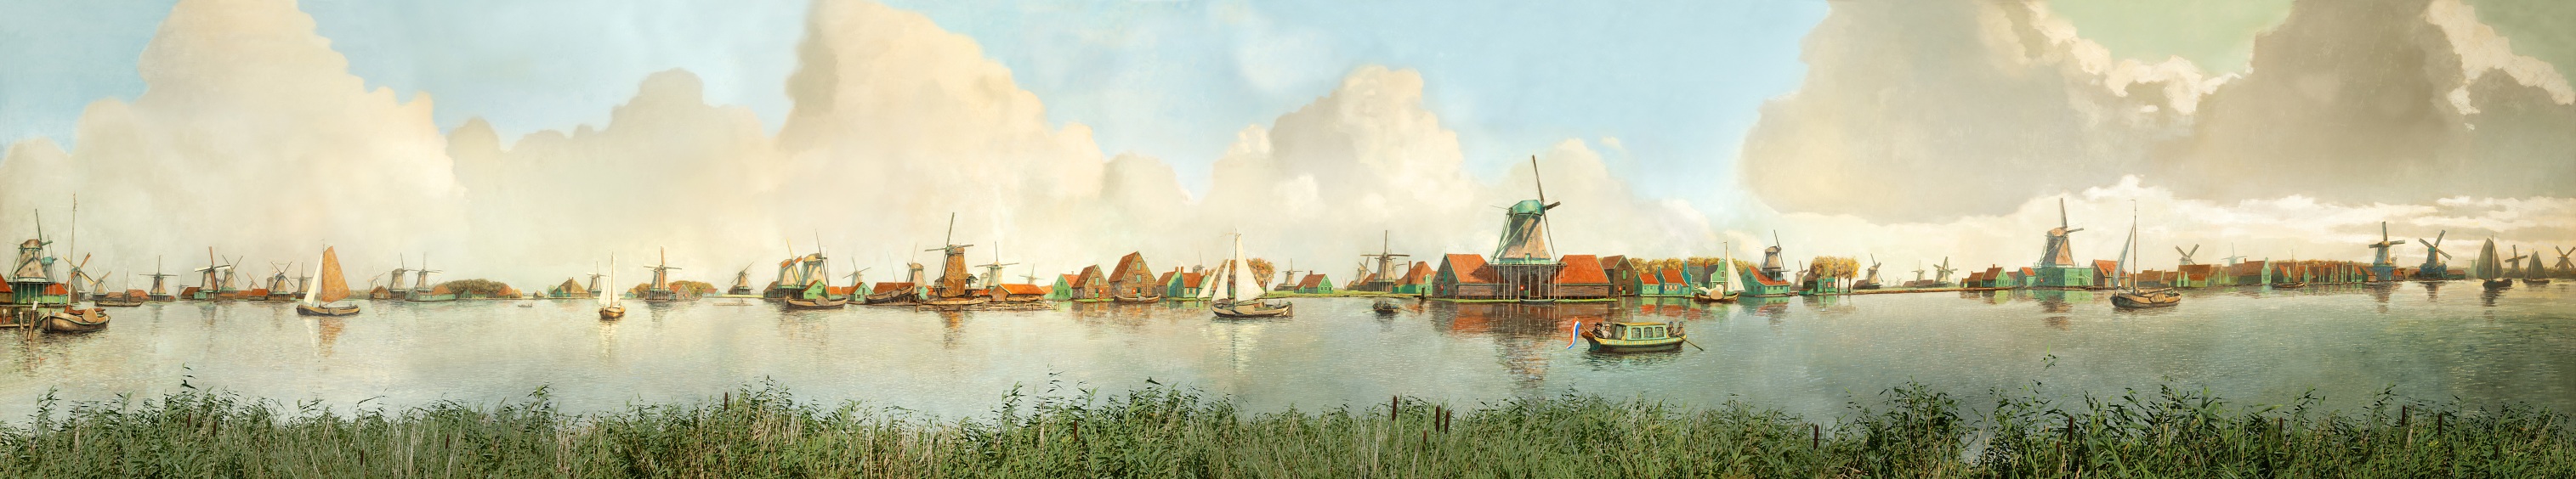 founder-of-the-society-of-zaan-mills-frans-mars-painted-this-mill-panorama-in-the-nineteen-fourties